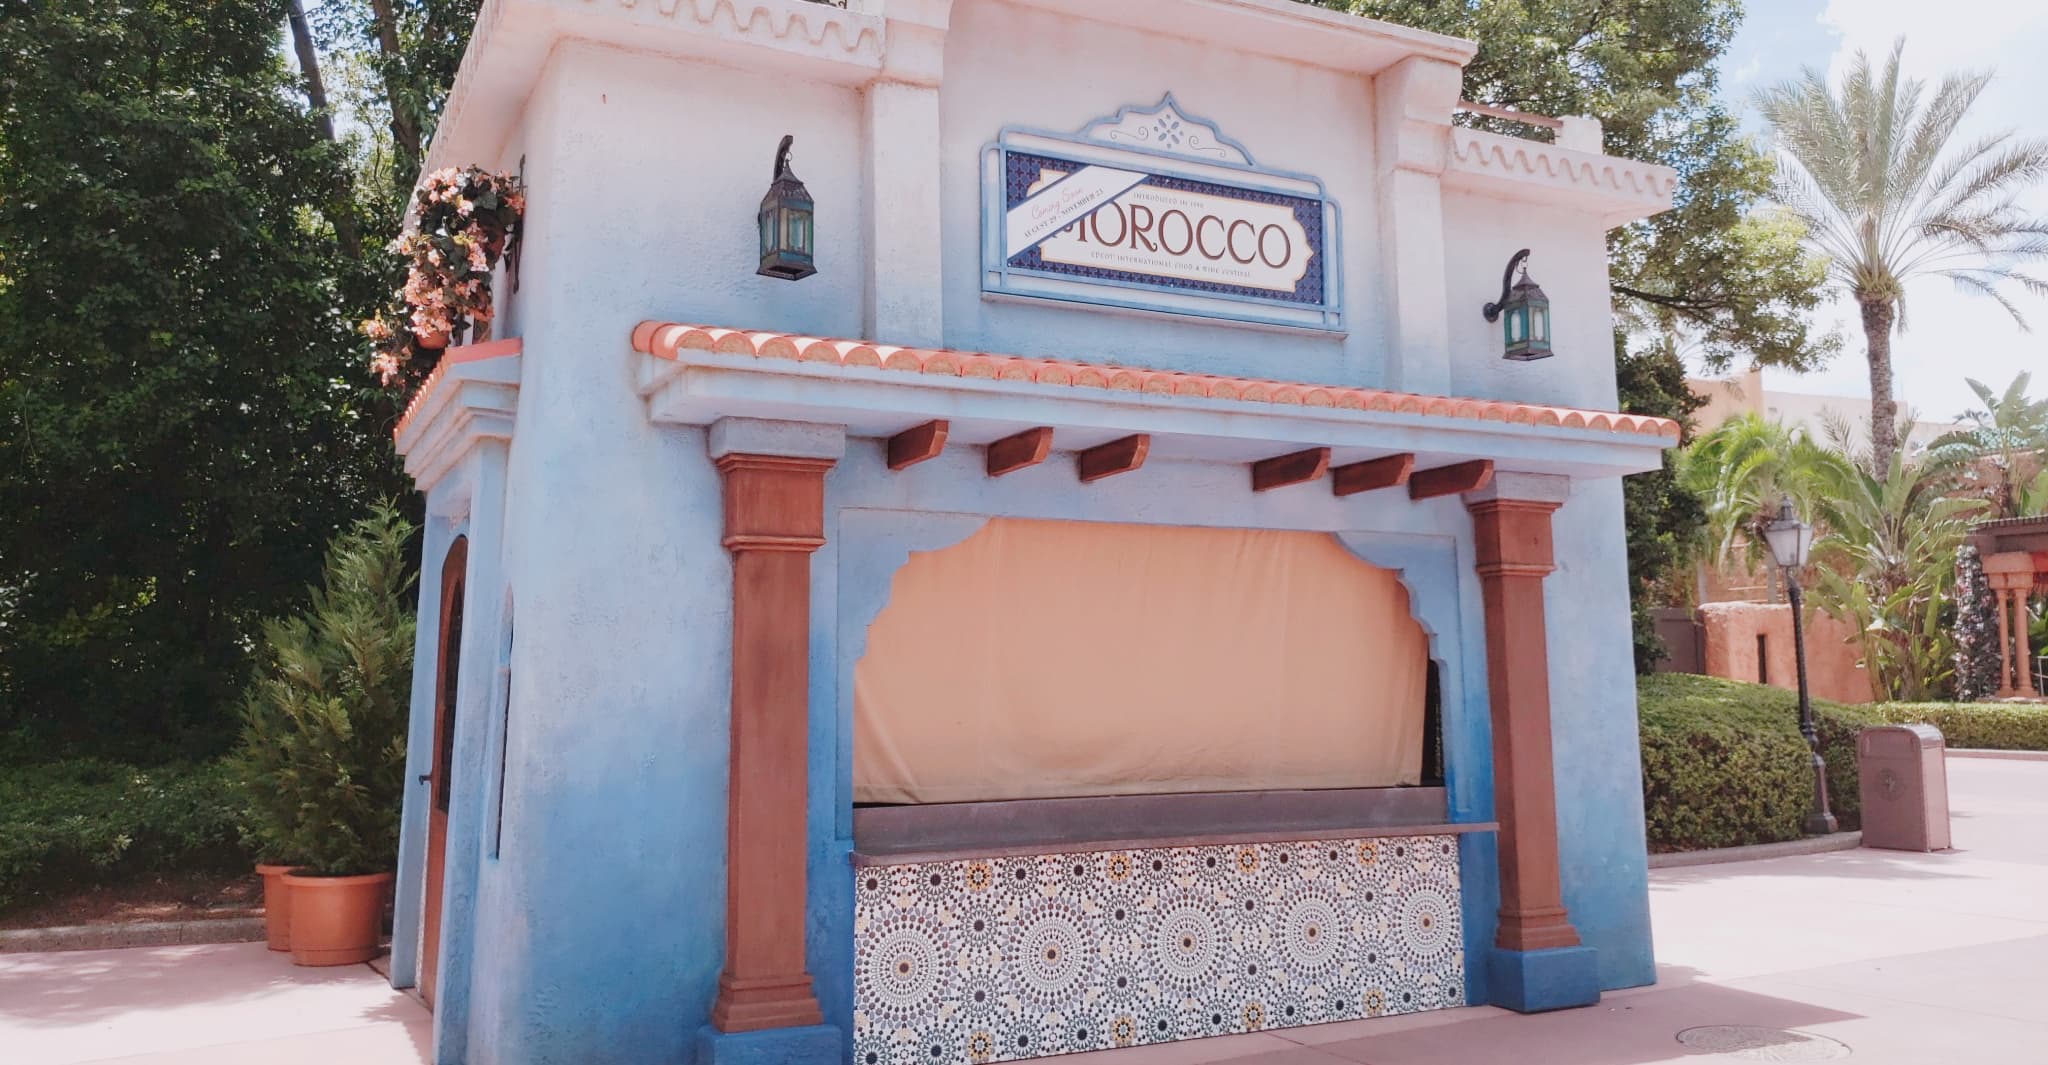 2019 Epcot Food and Wine Festival Booths Announced